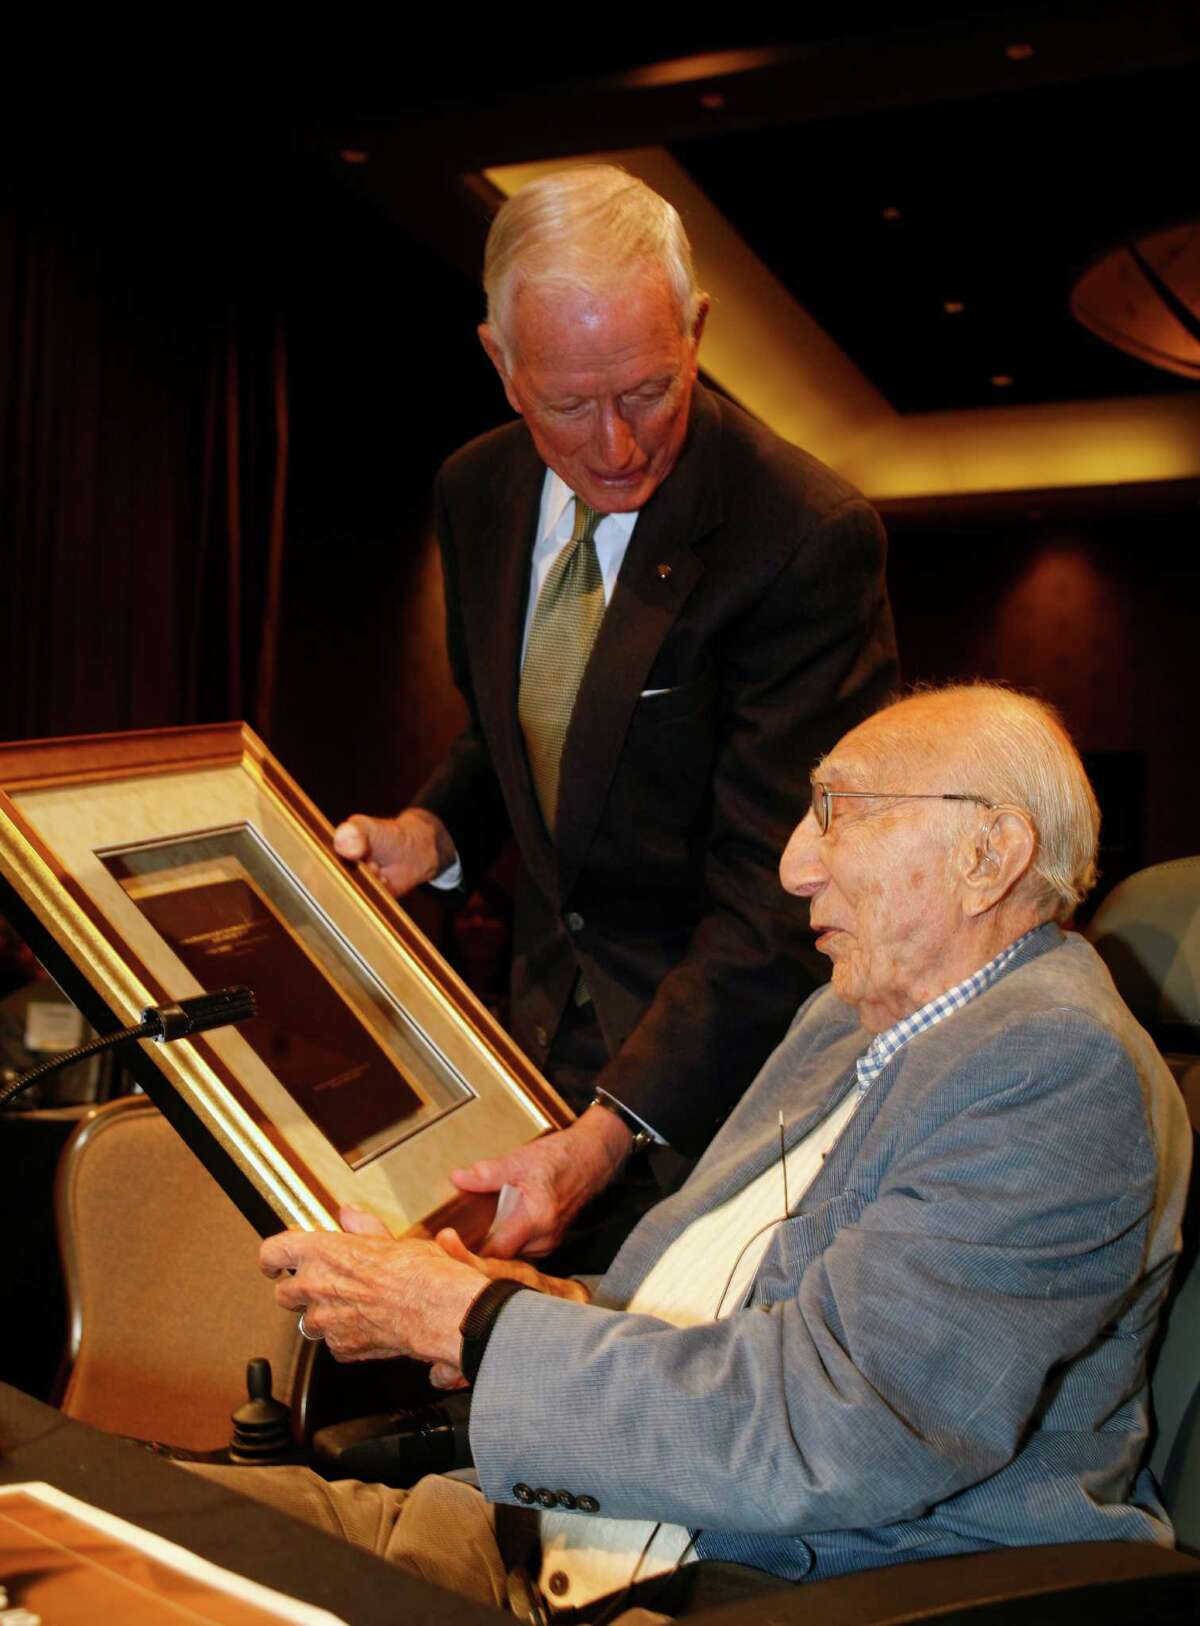 In 2008, Dr. Michael DeBakey, seated, and Dr. Denton Cooley publicly put to rest the private feud.